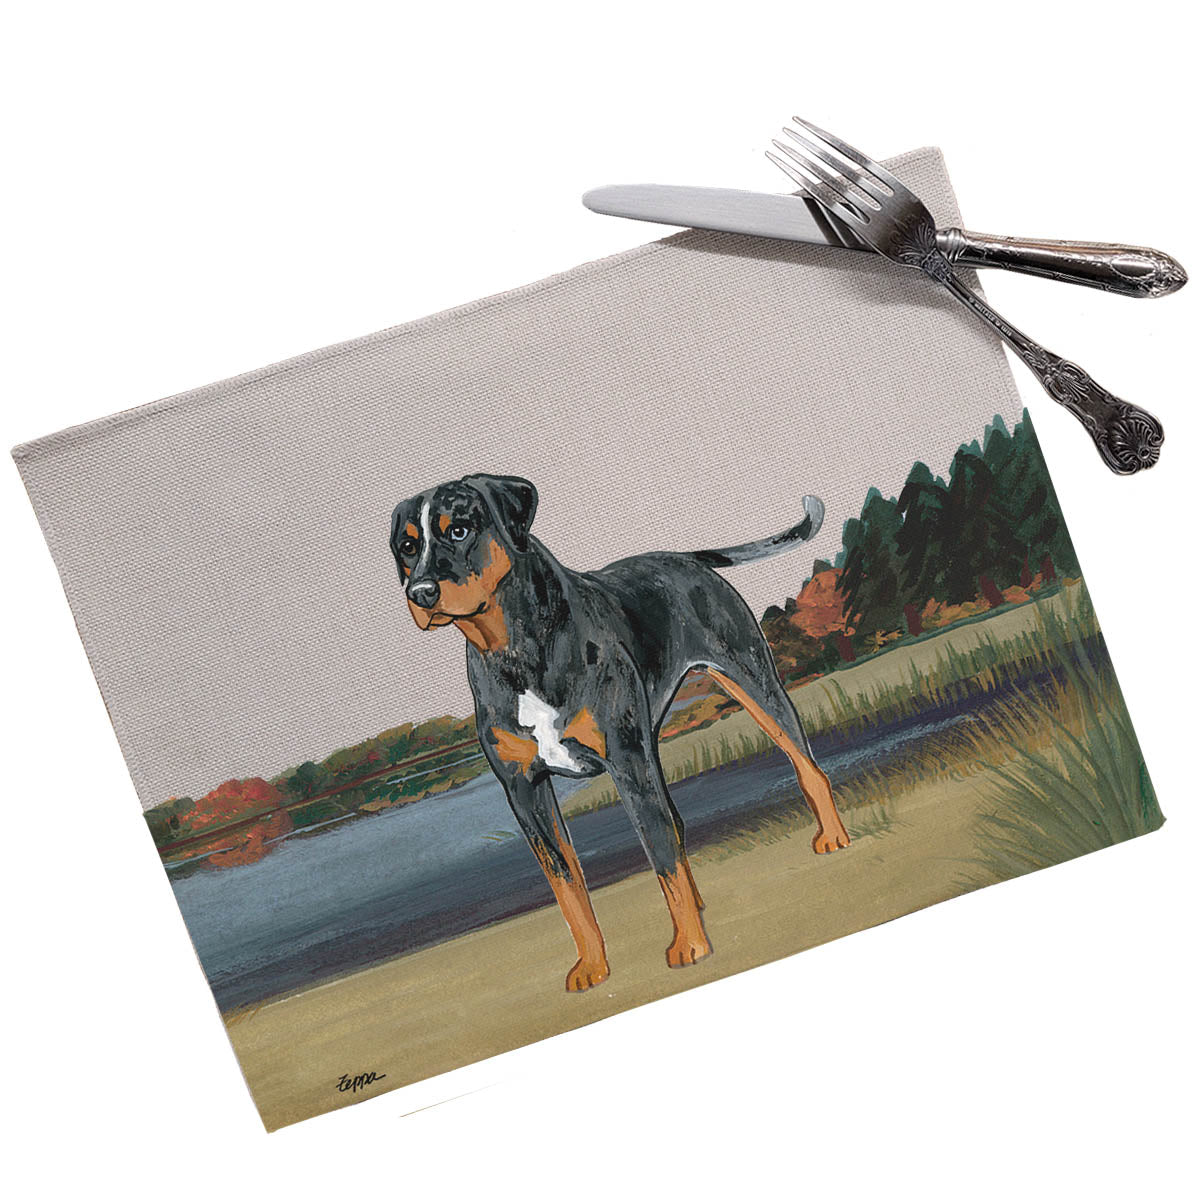 Catahoula Leopard Dog Scenic Placemats